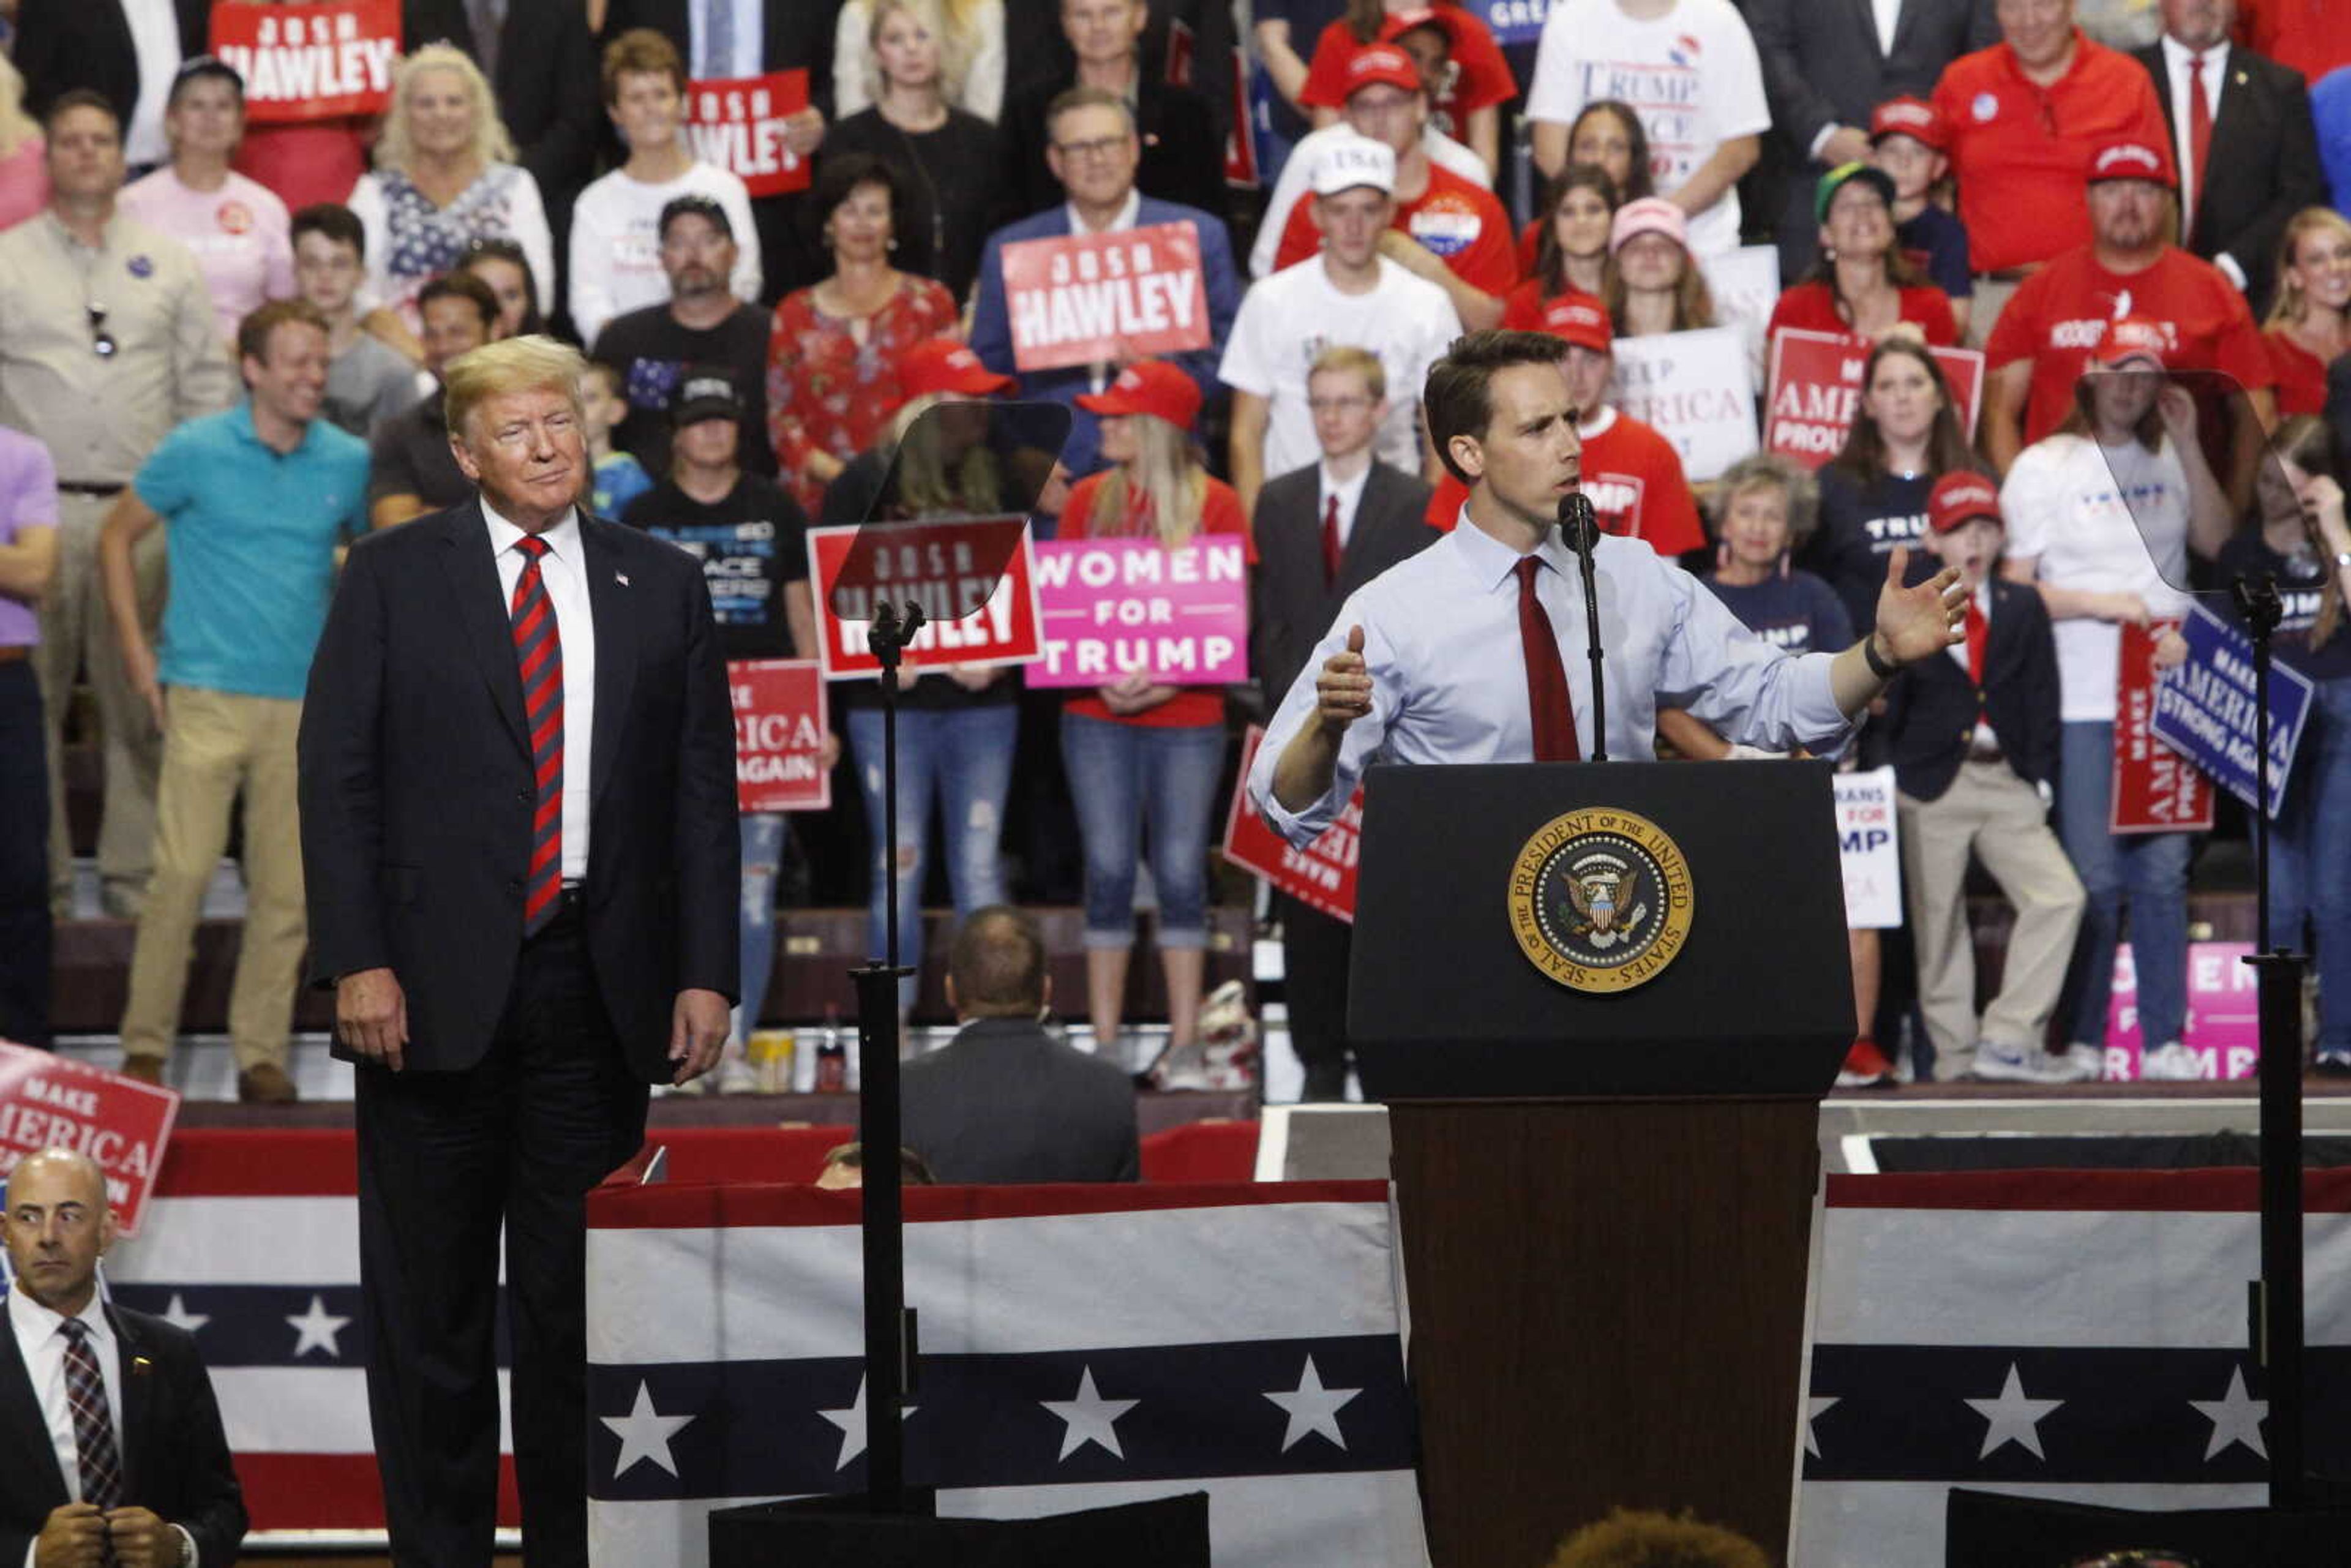 Missouri Attorney General Josh Hawley and President Trump speak to the audience at the MAGA rally at the JQH arena on Missouri State's campus Sept. 21.